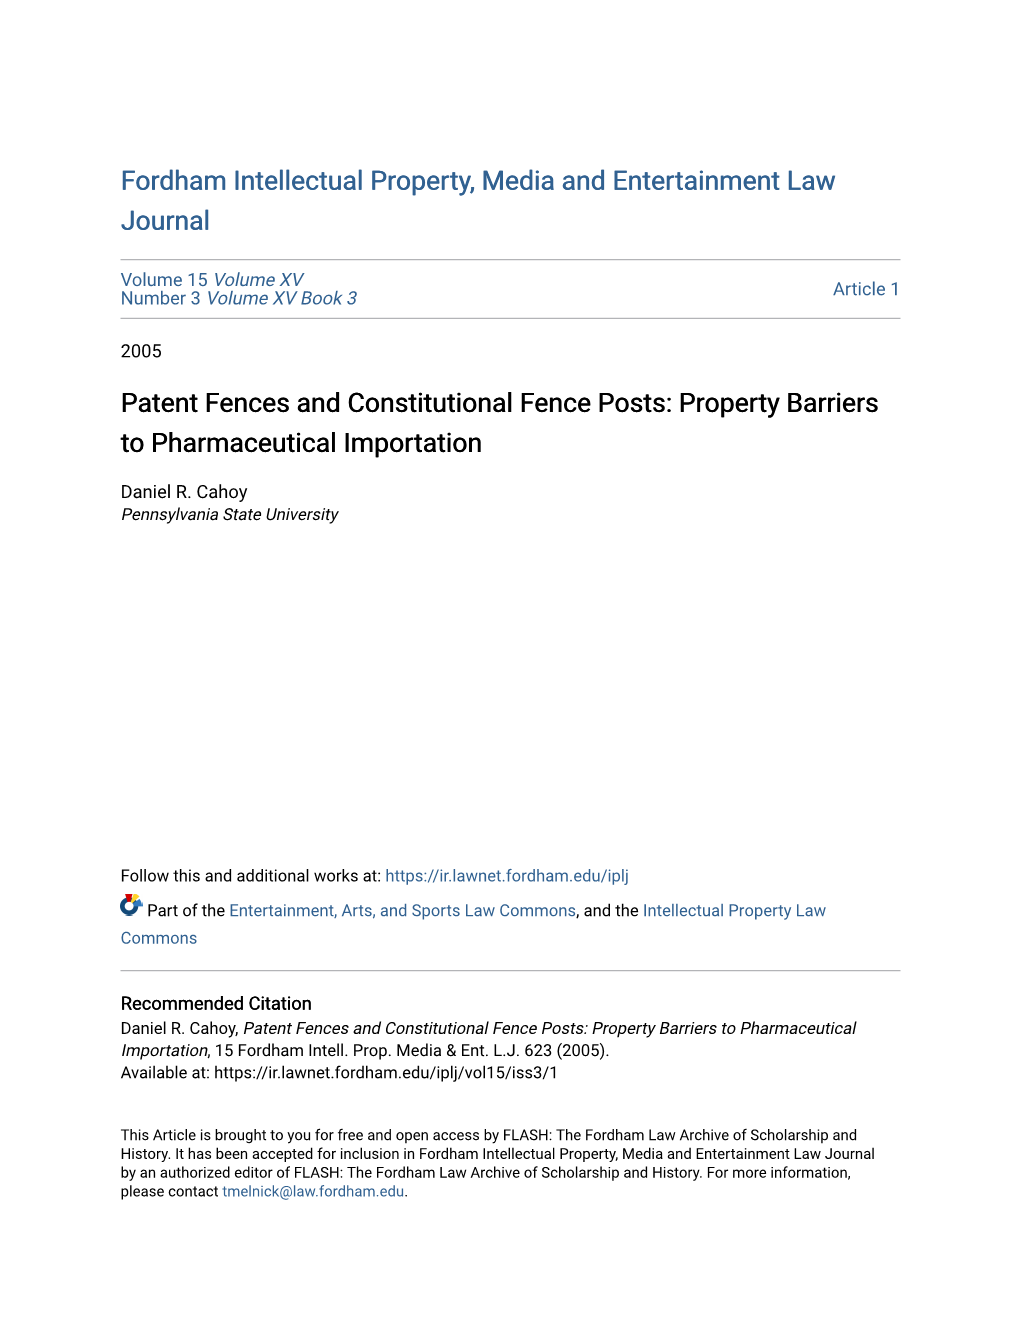 Patent Fences and Constitutional Fence Posts: Property Barriers to Pharmaceutical Importation